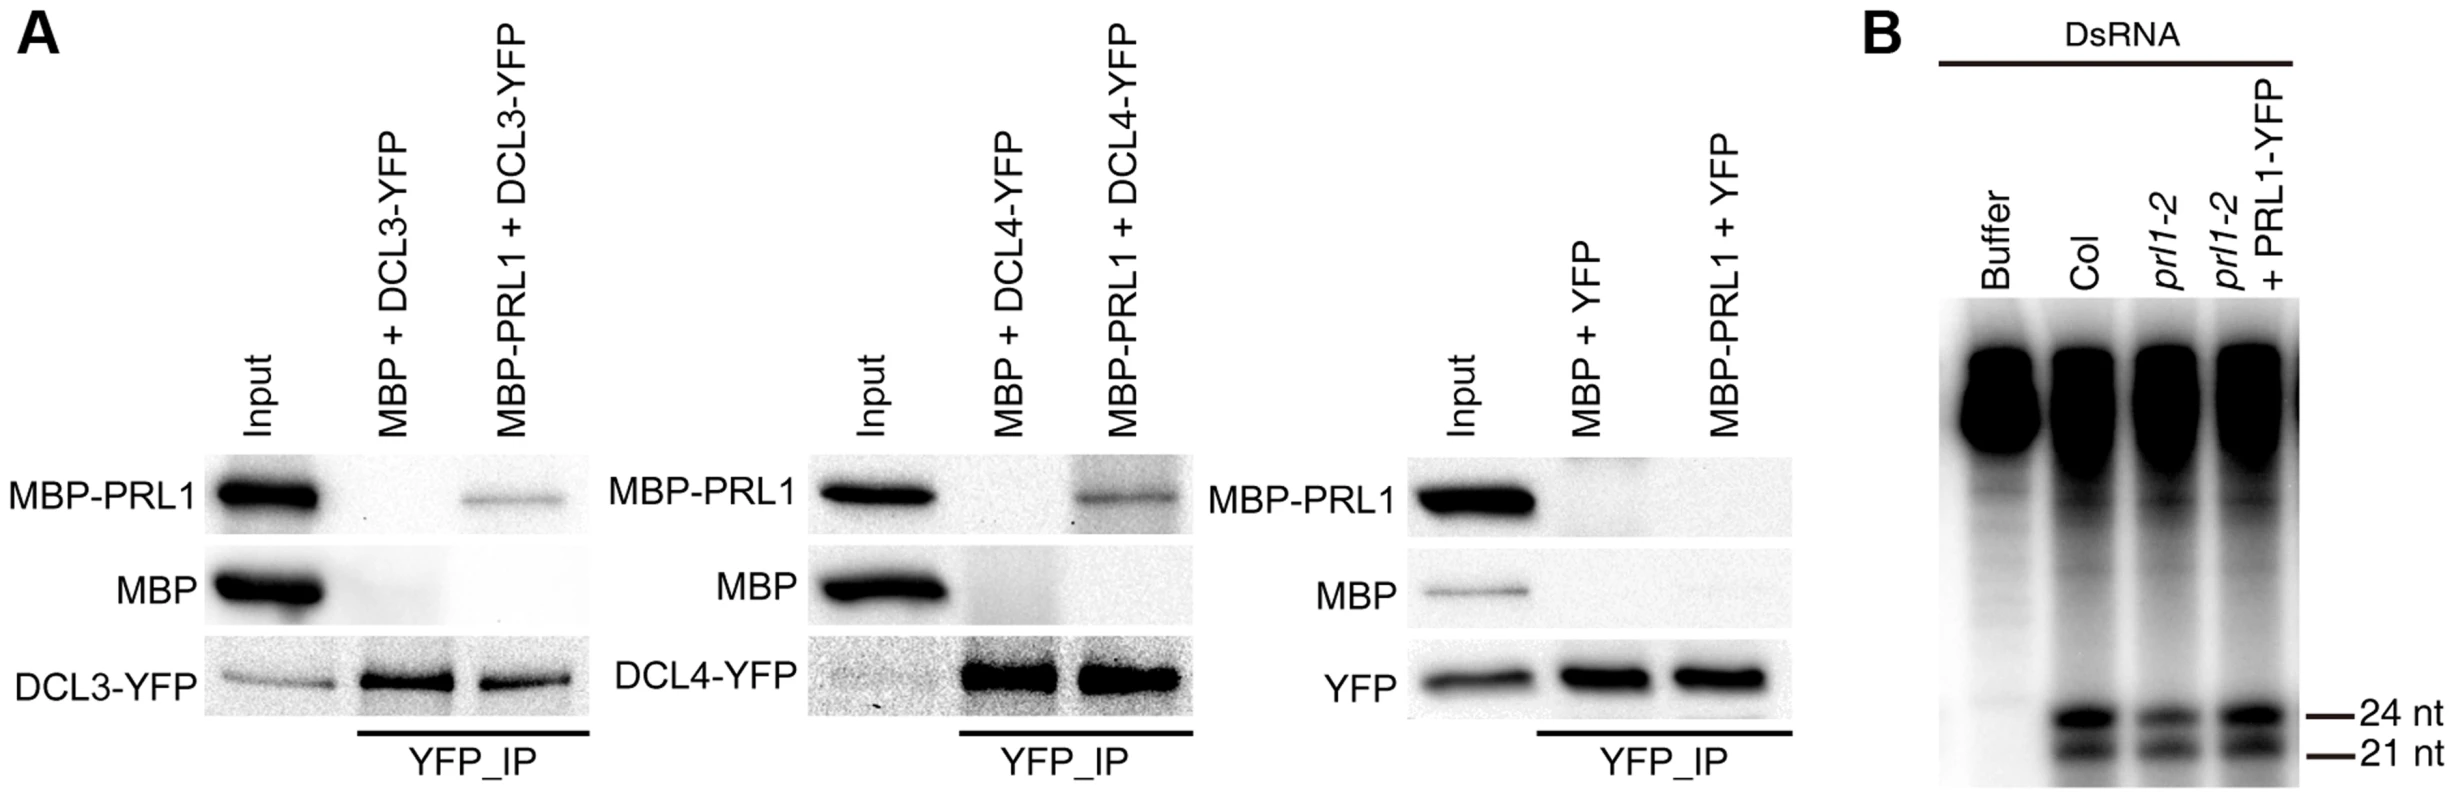 The role of PRL1 in siRNA biogenesis.